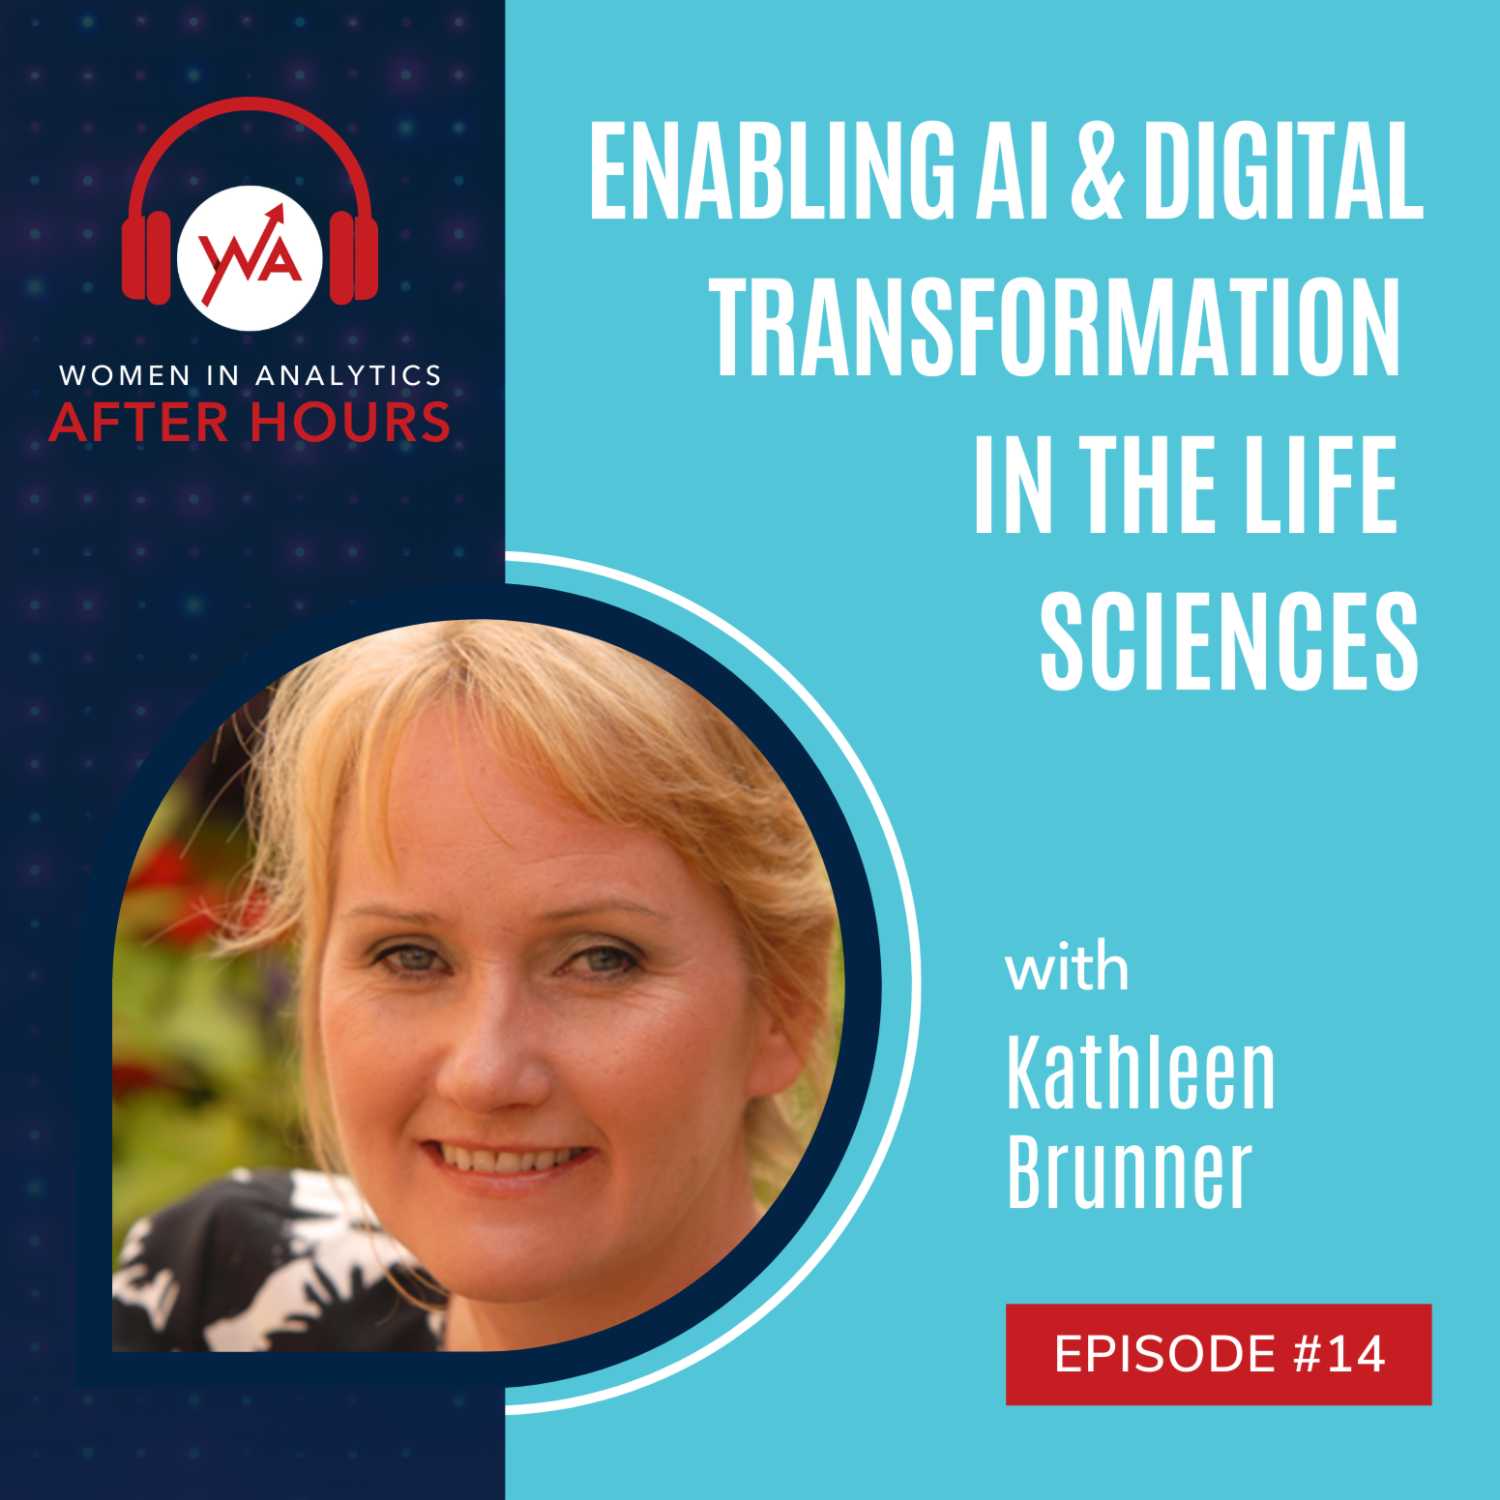 Episode 14: Enabling AI & Digital Transformation in the Life Sciences with Kathleen Brunner